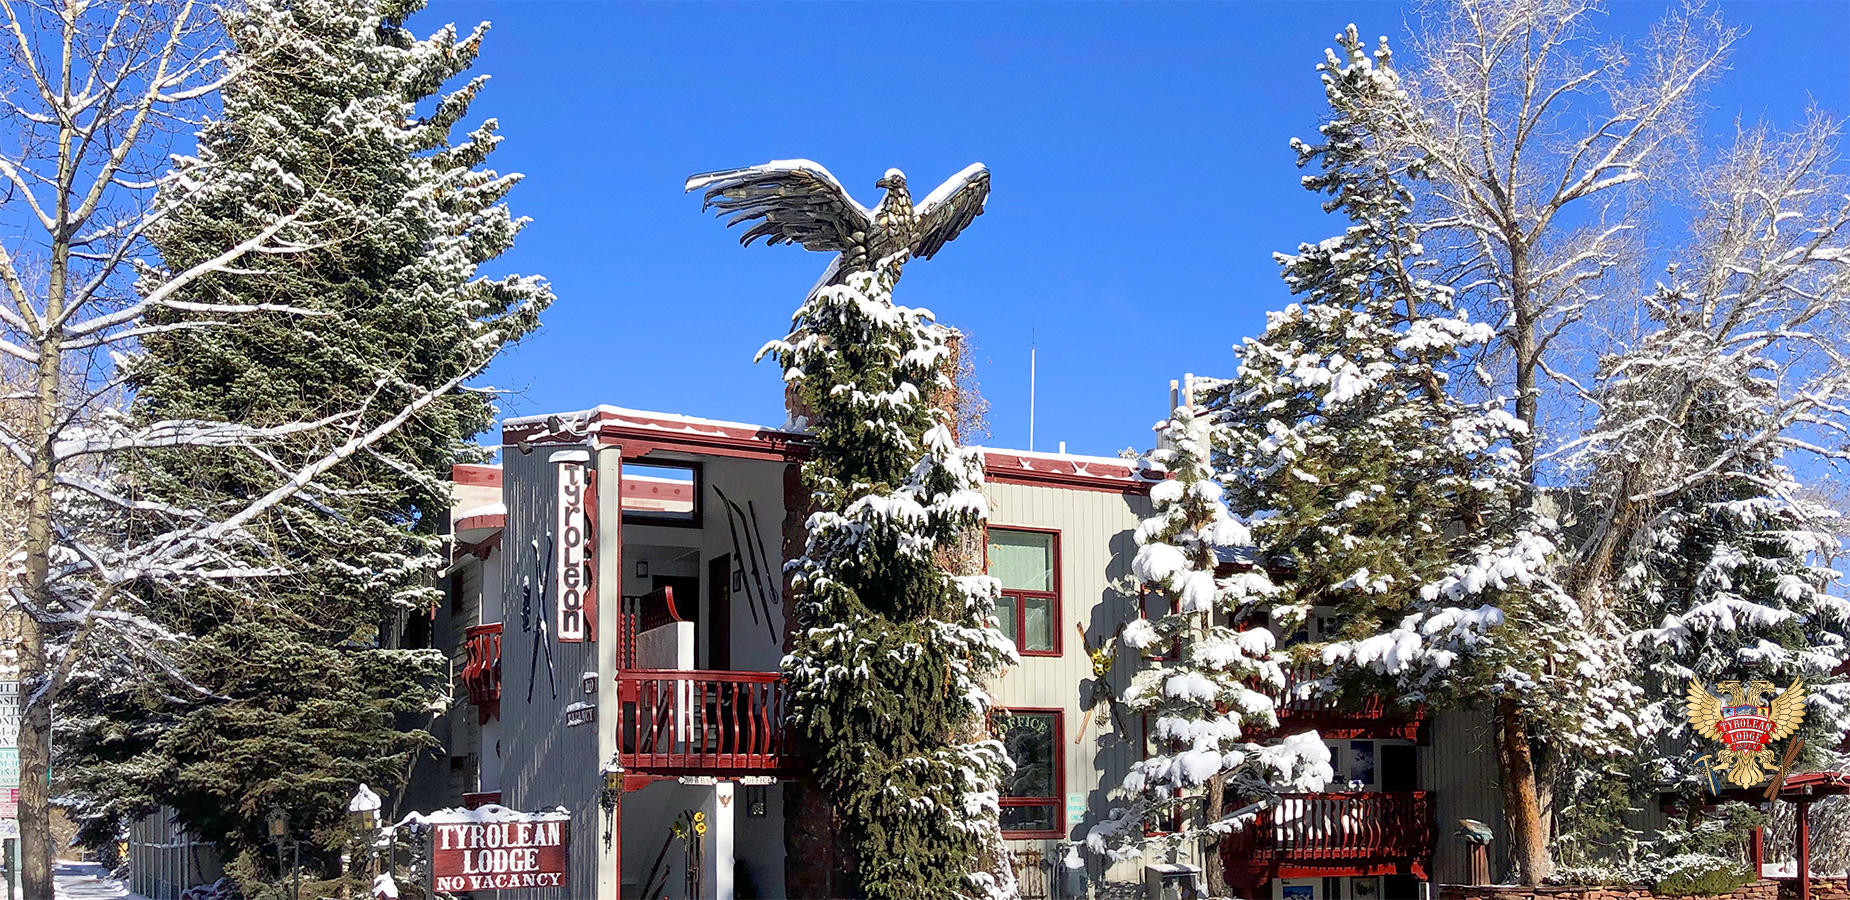 Lou Willie's eagle sculpture is the Tyrolean Lodge's iconic beacon in winter